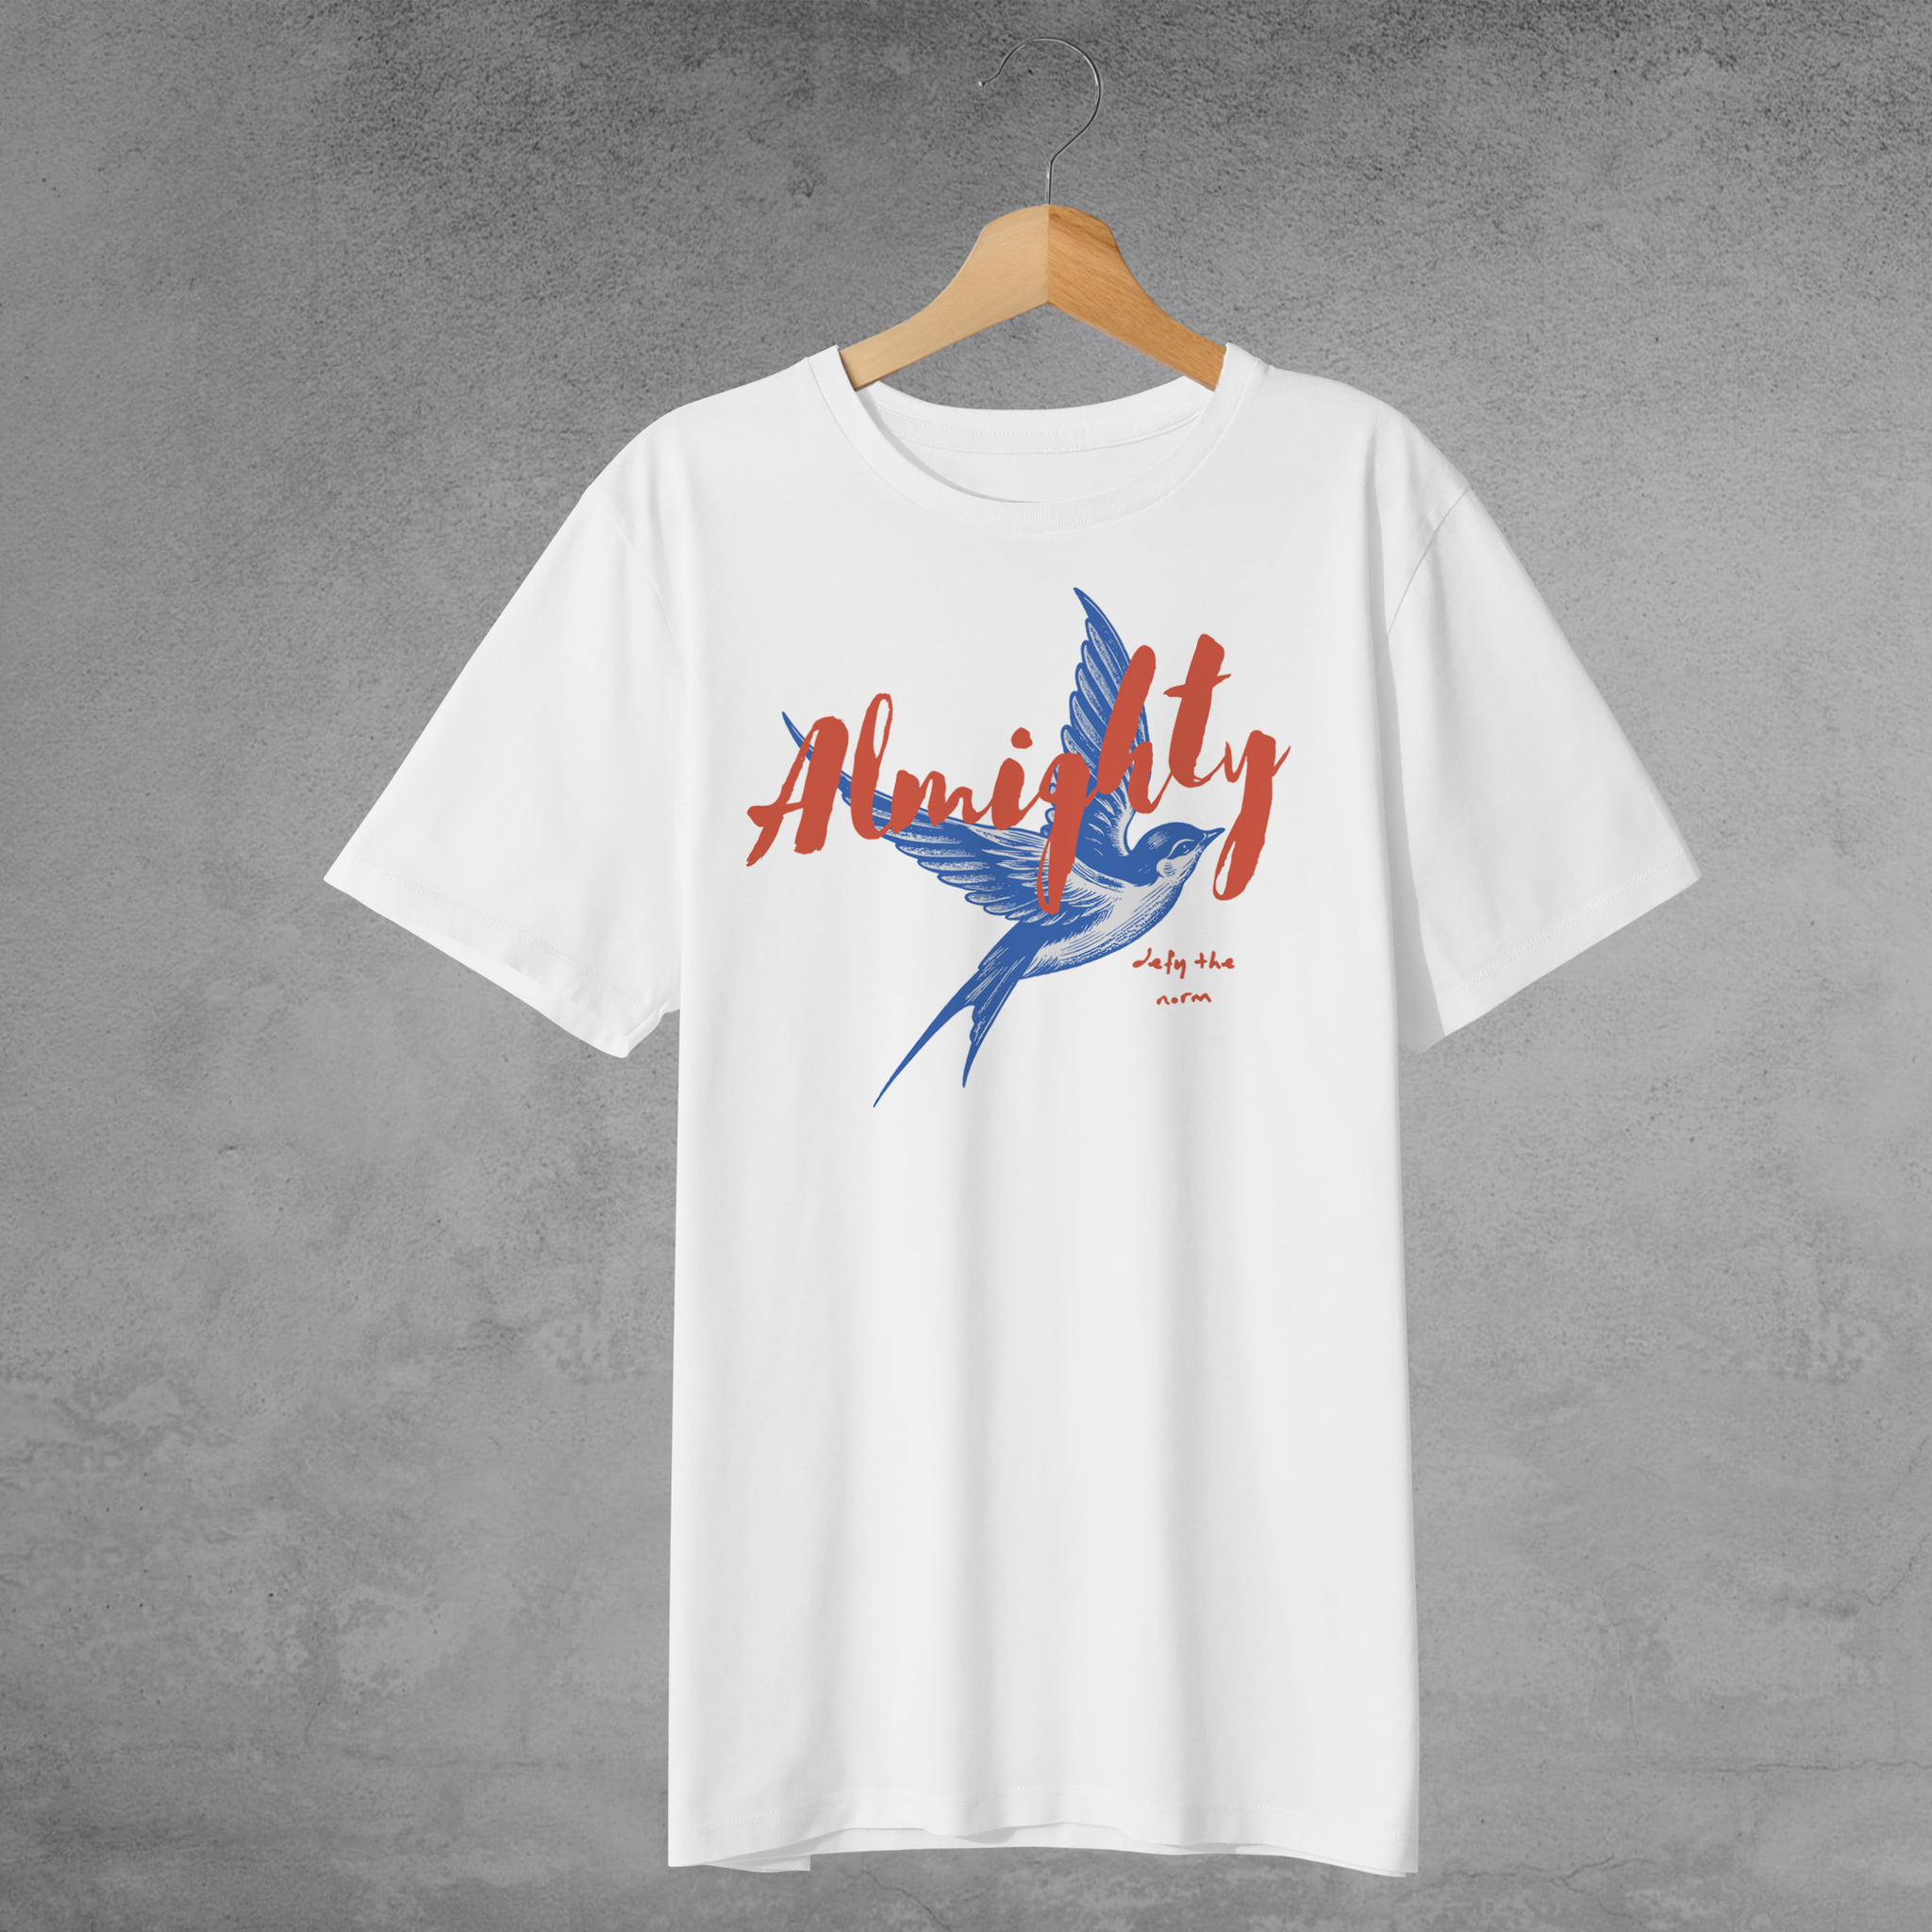 Almighty Wingtail Edition - T-Shirt